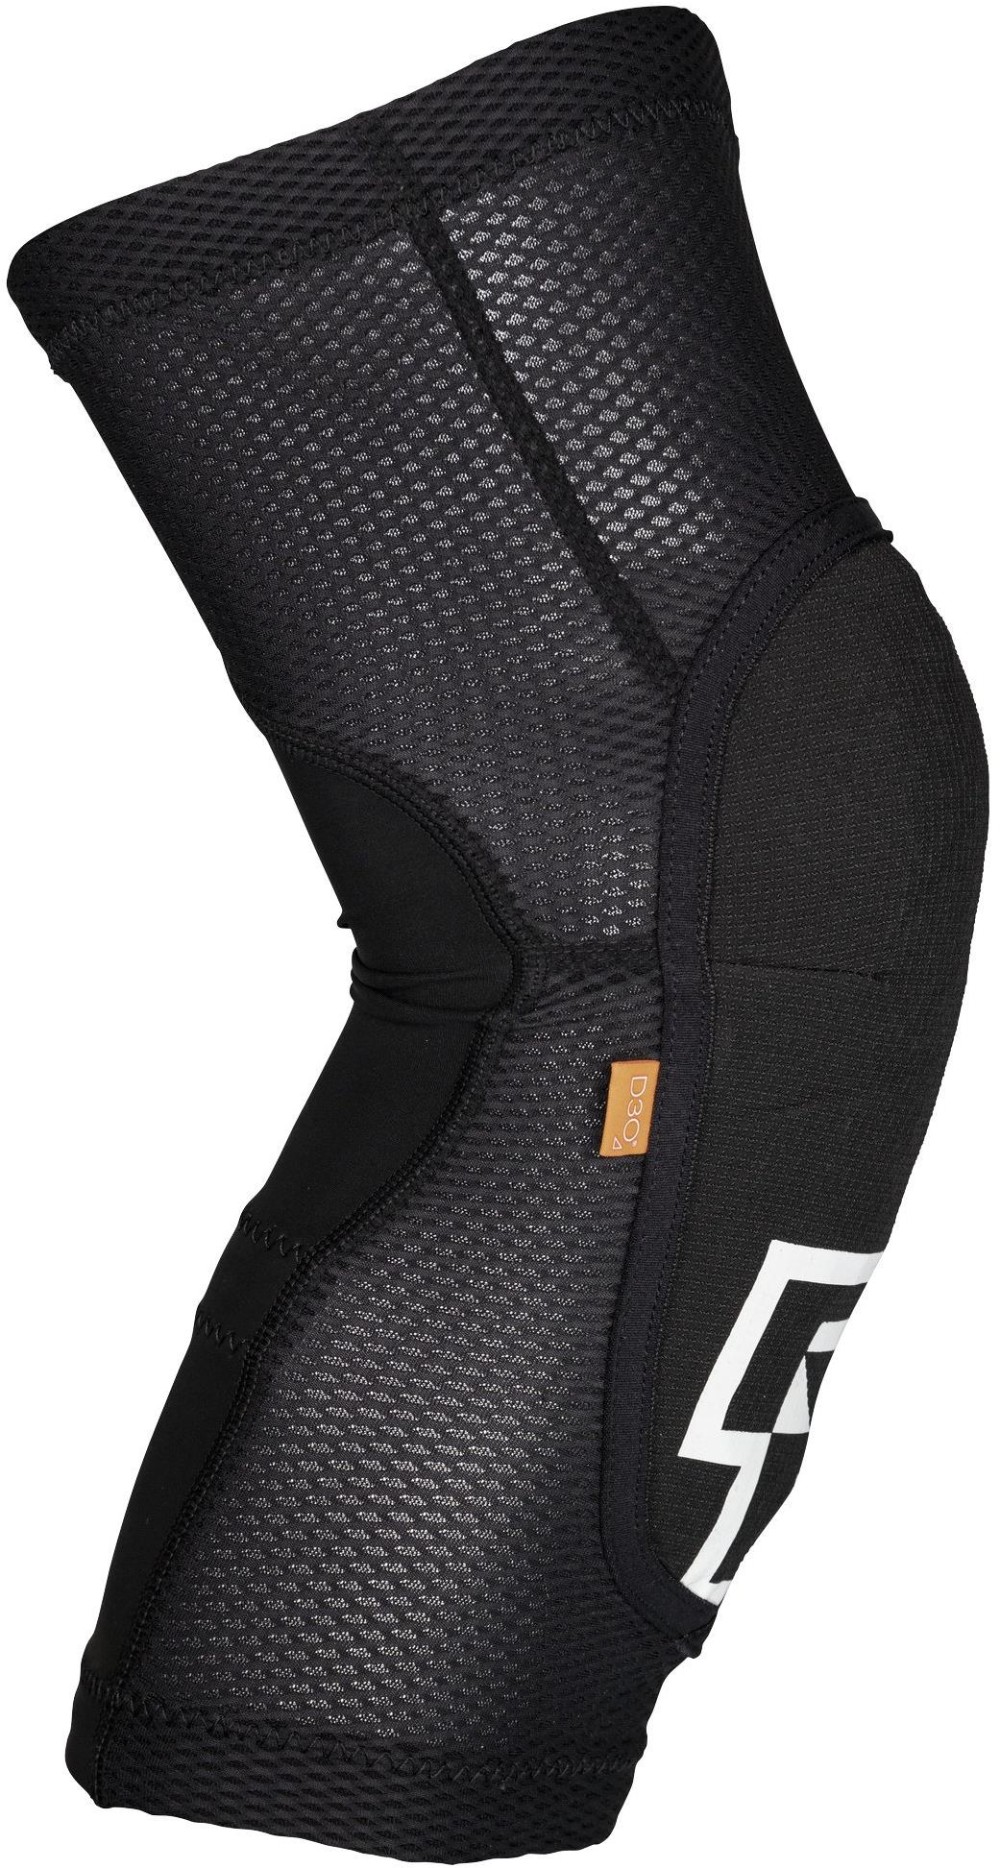 Covert Stealth Knee Guards image 1